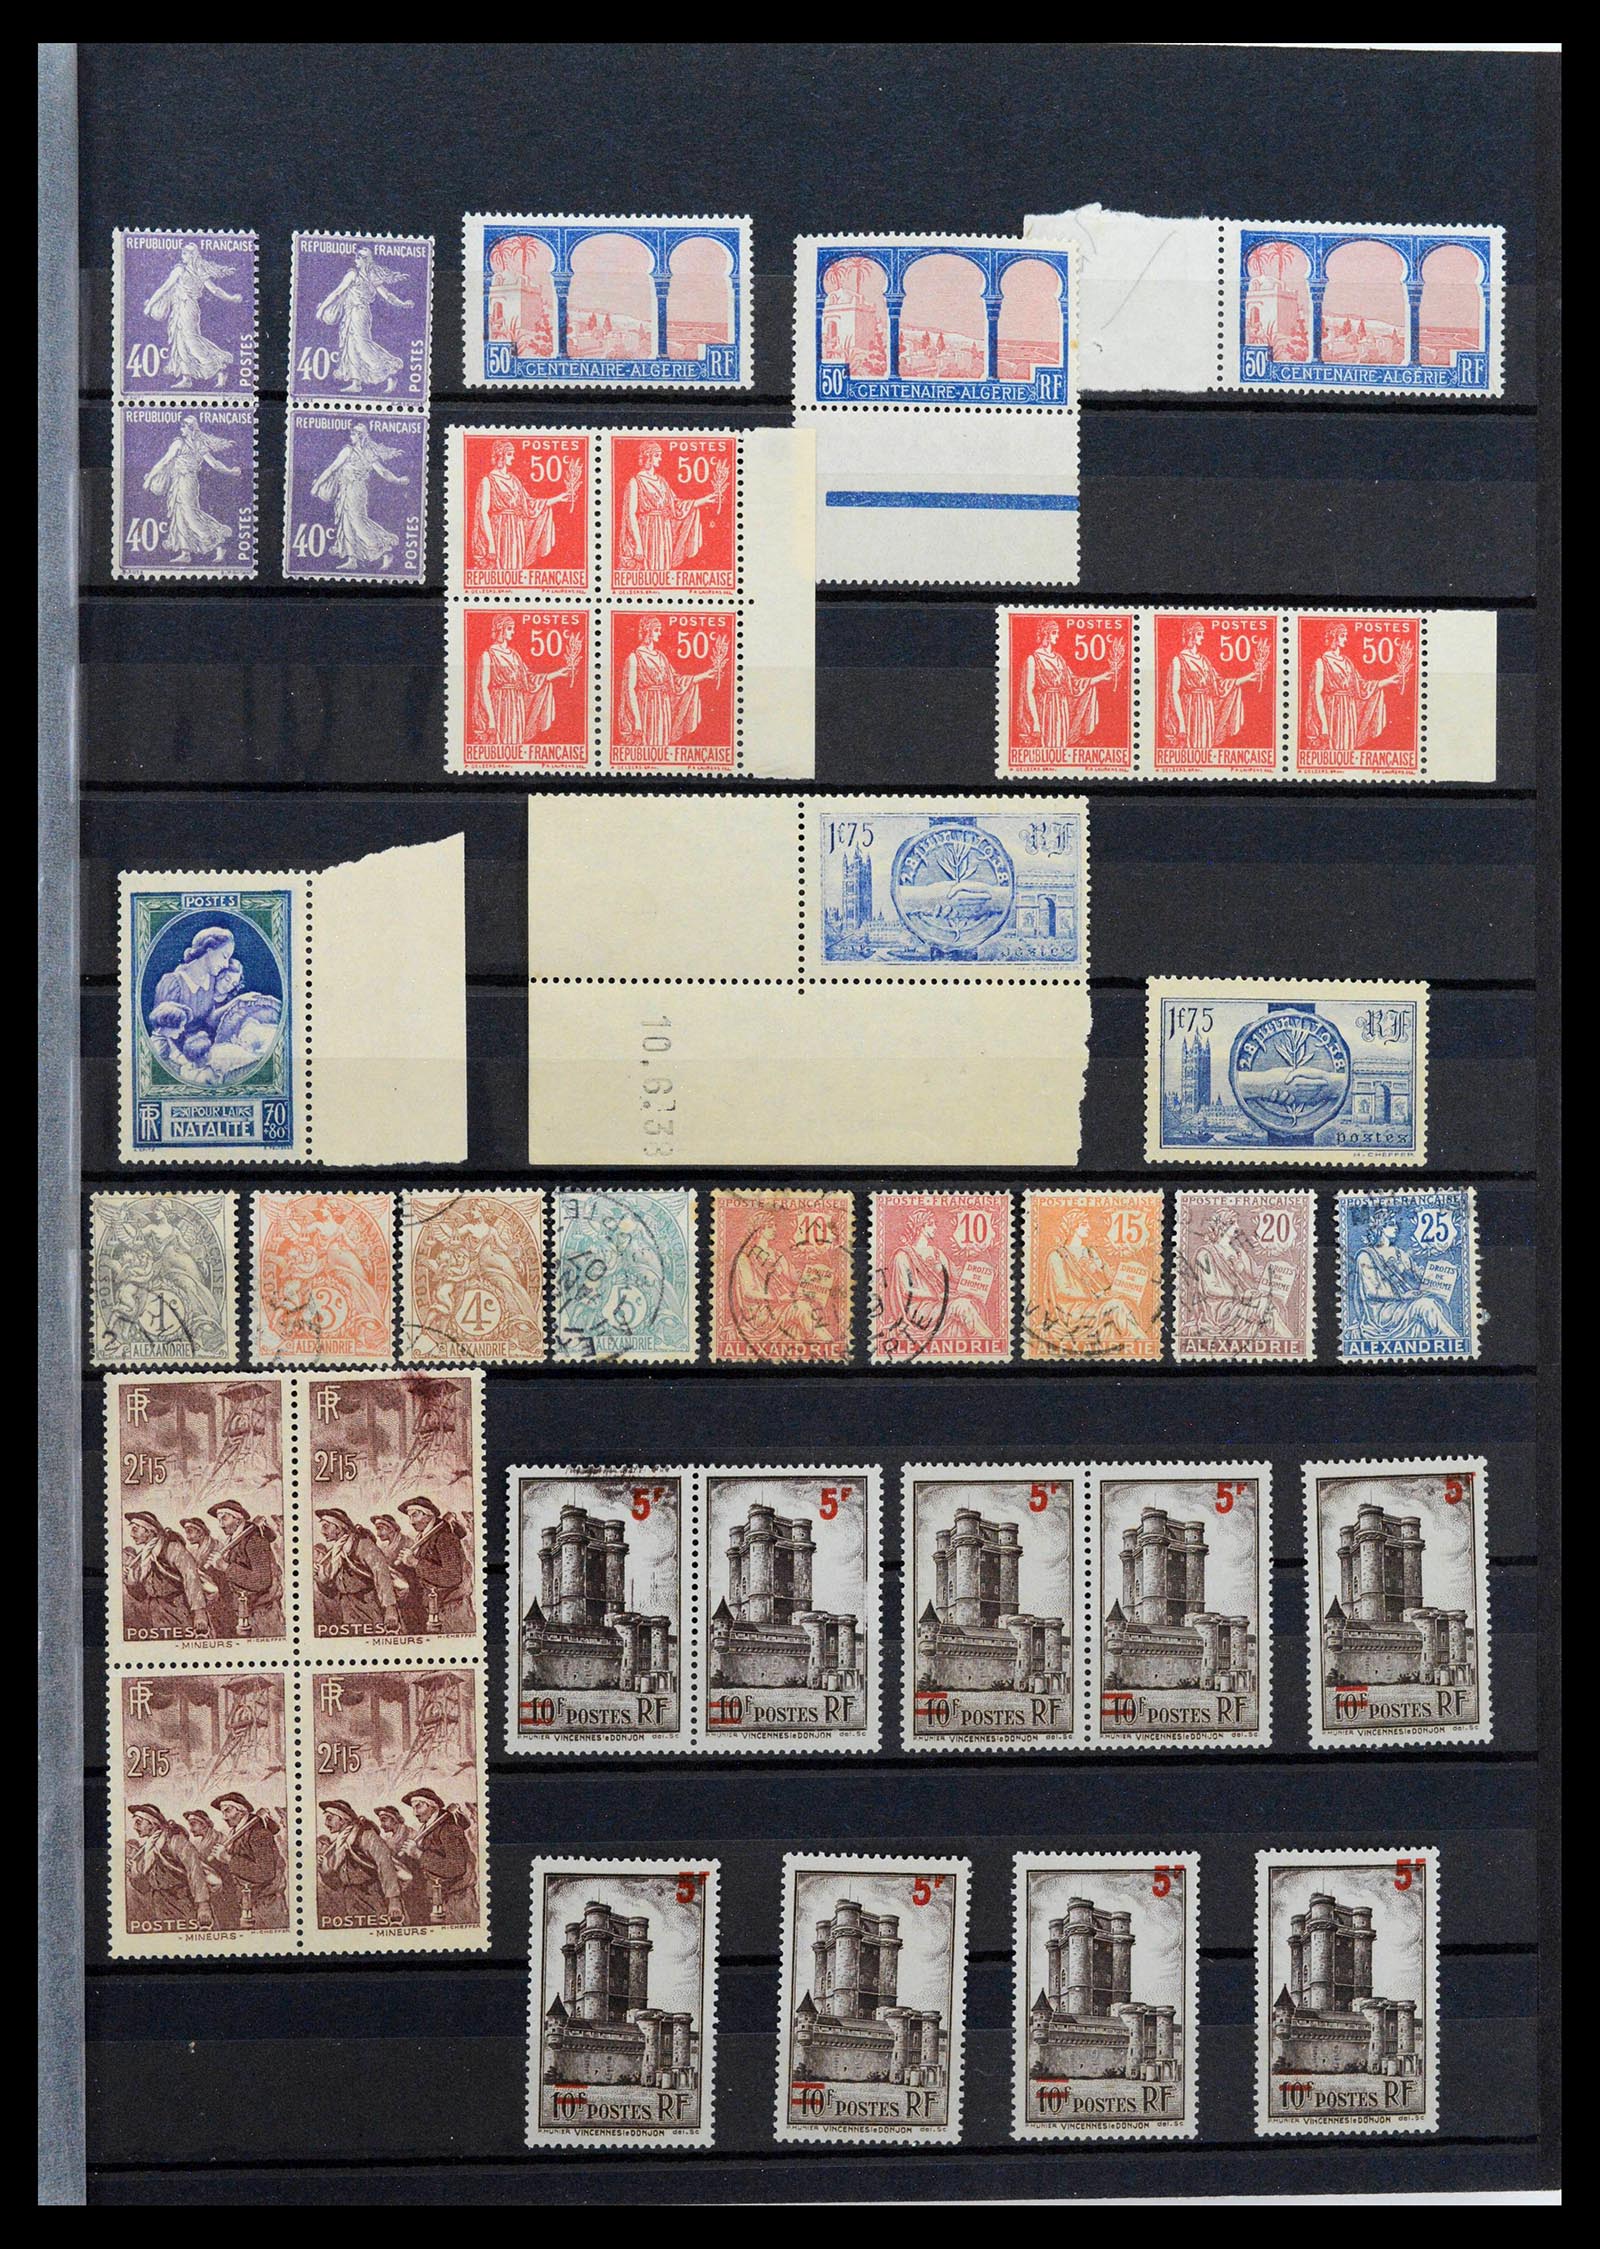 39423 0005 - Stamp collection 39423 France varieties 1862-1985.